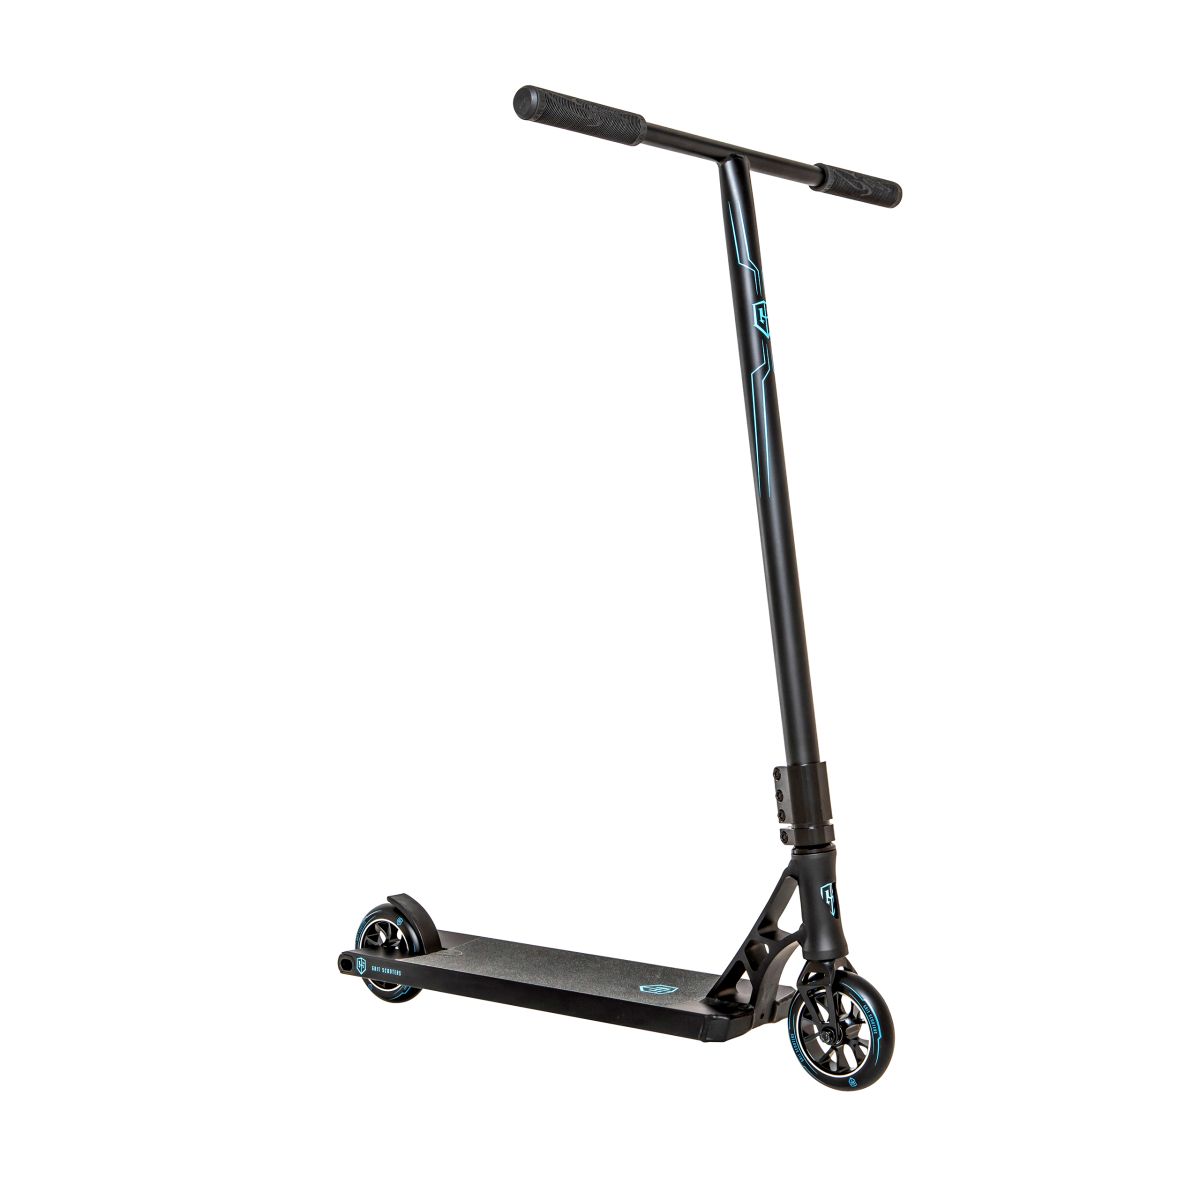 Grit scooters invader 6 inch pro scooter